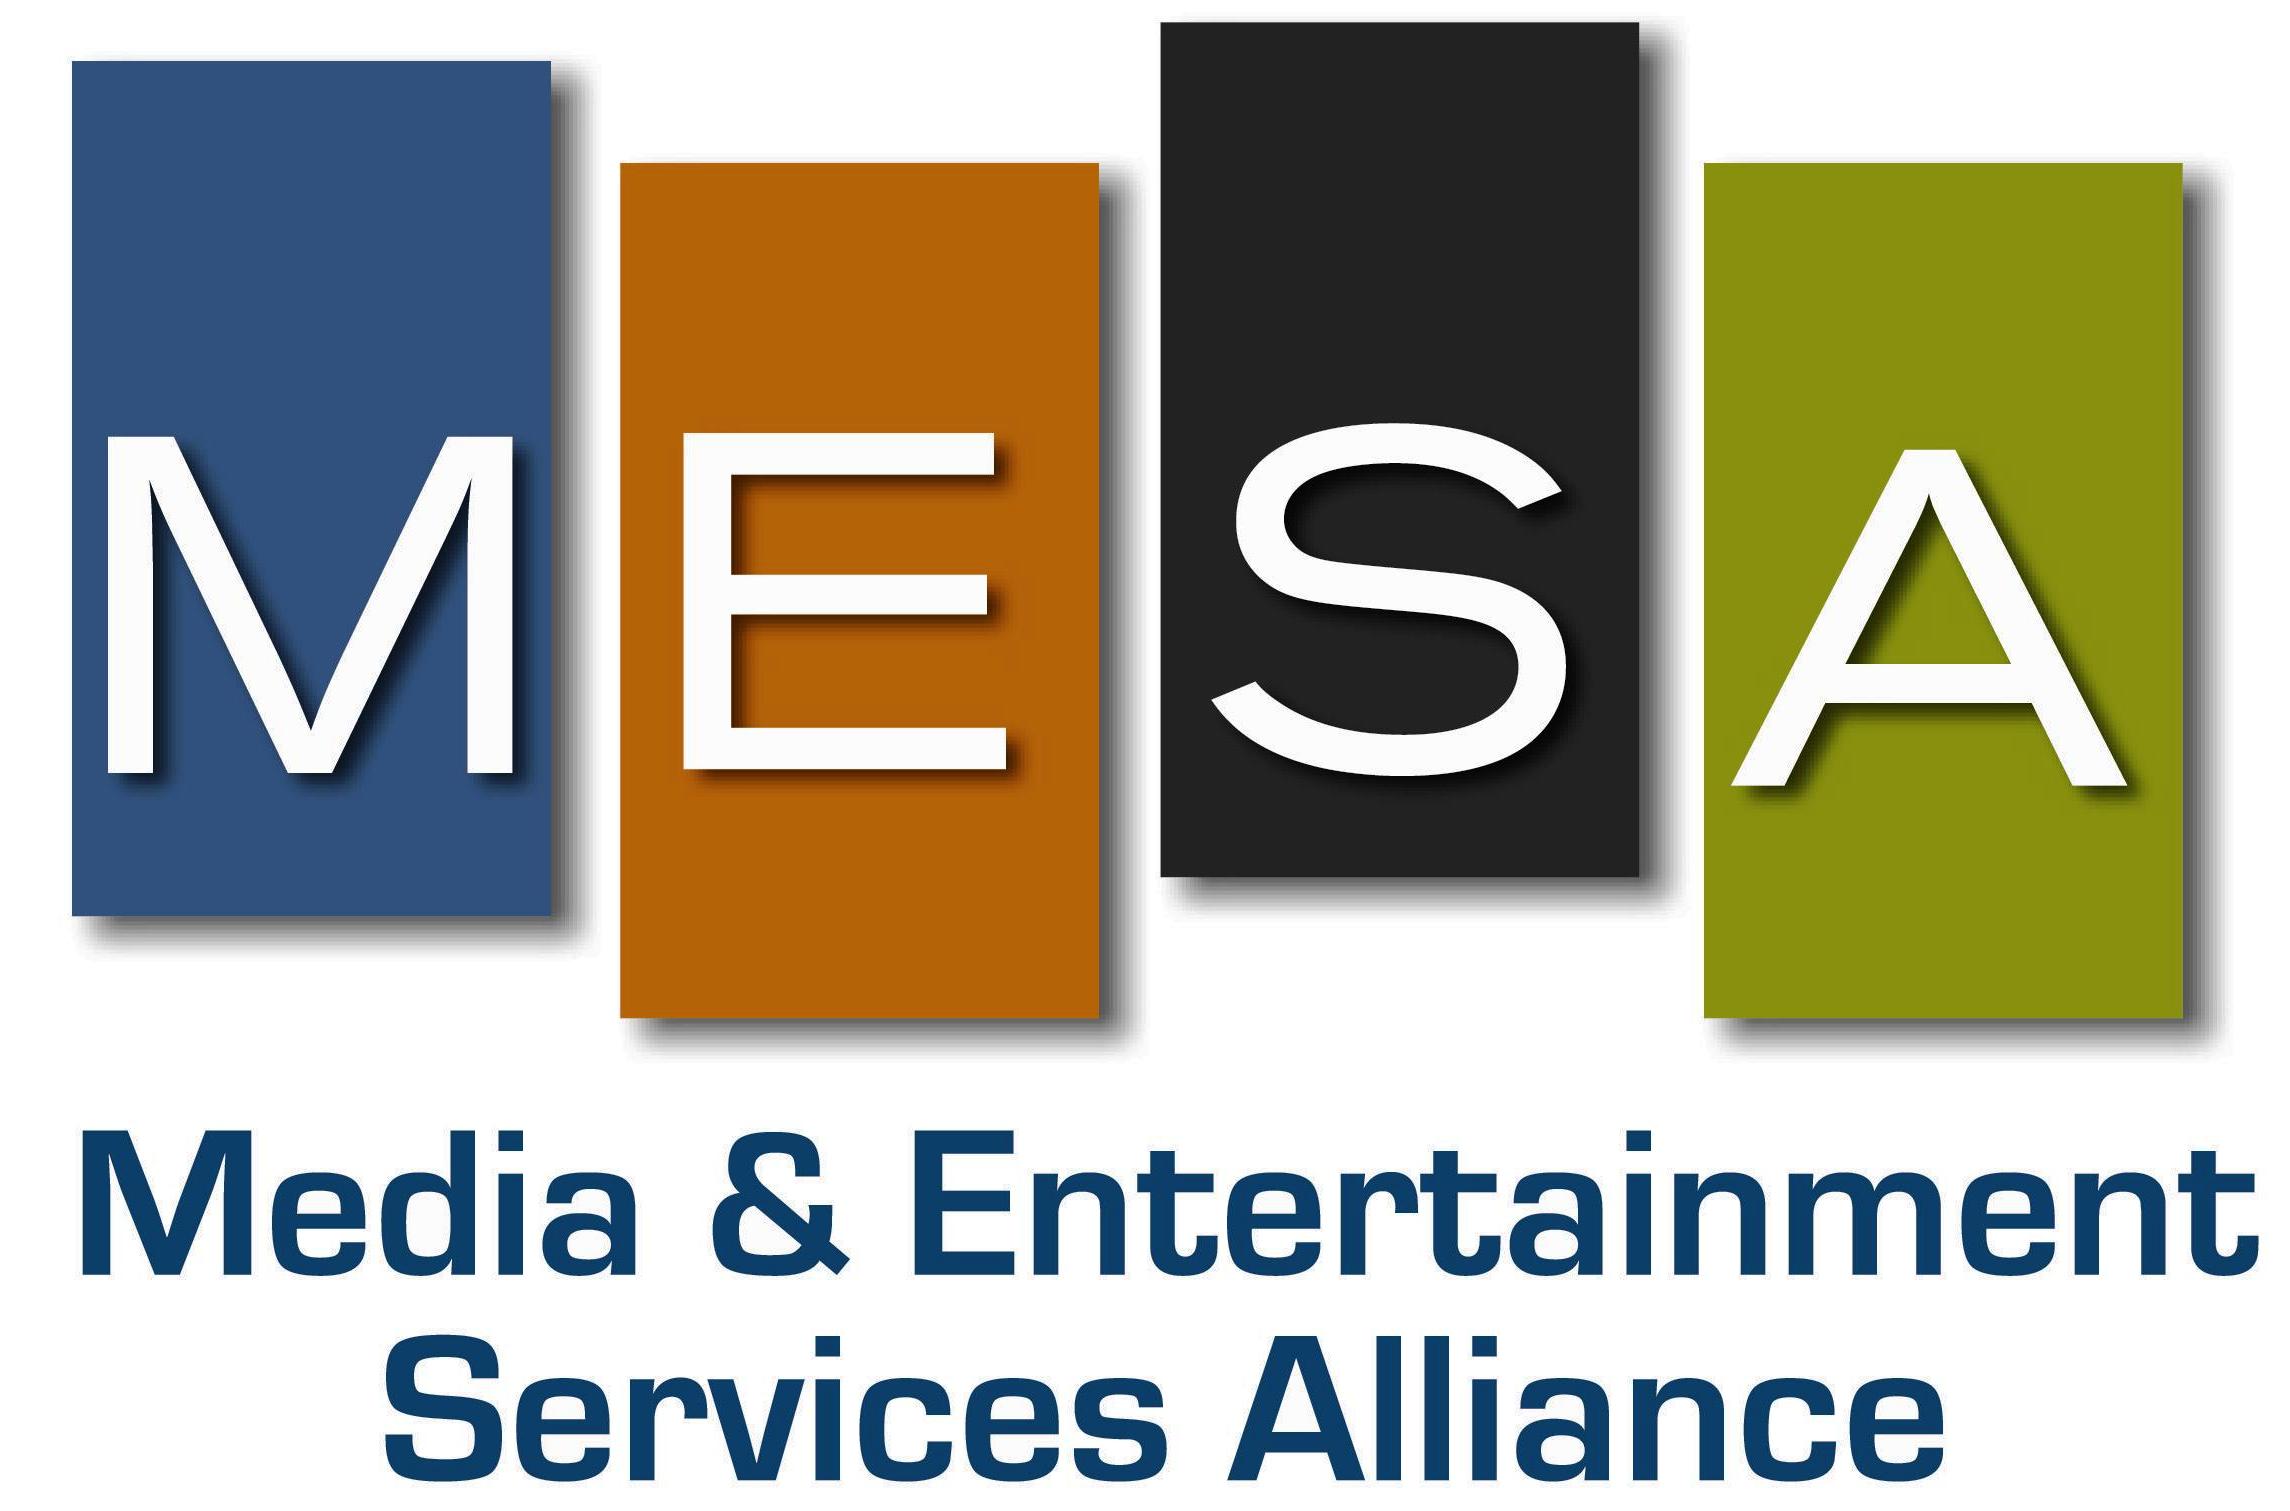 The logo for MESA media and entertainment services alliance.